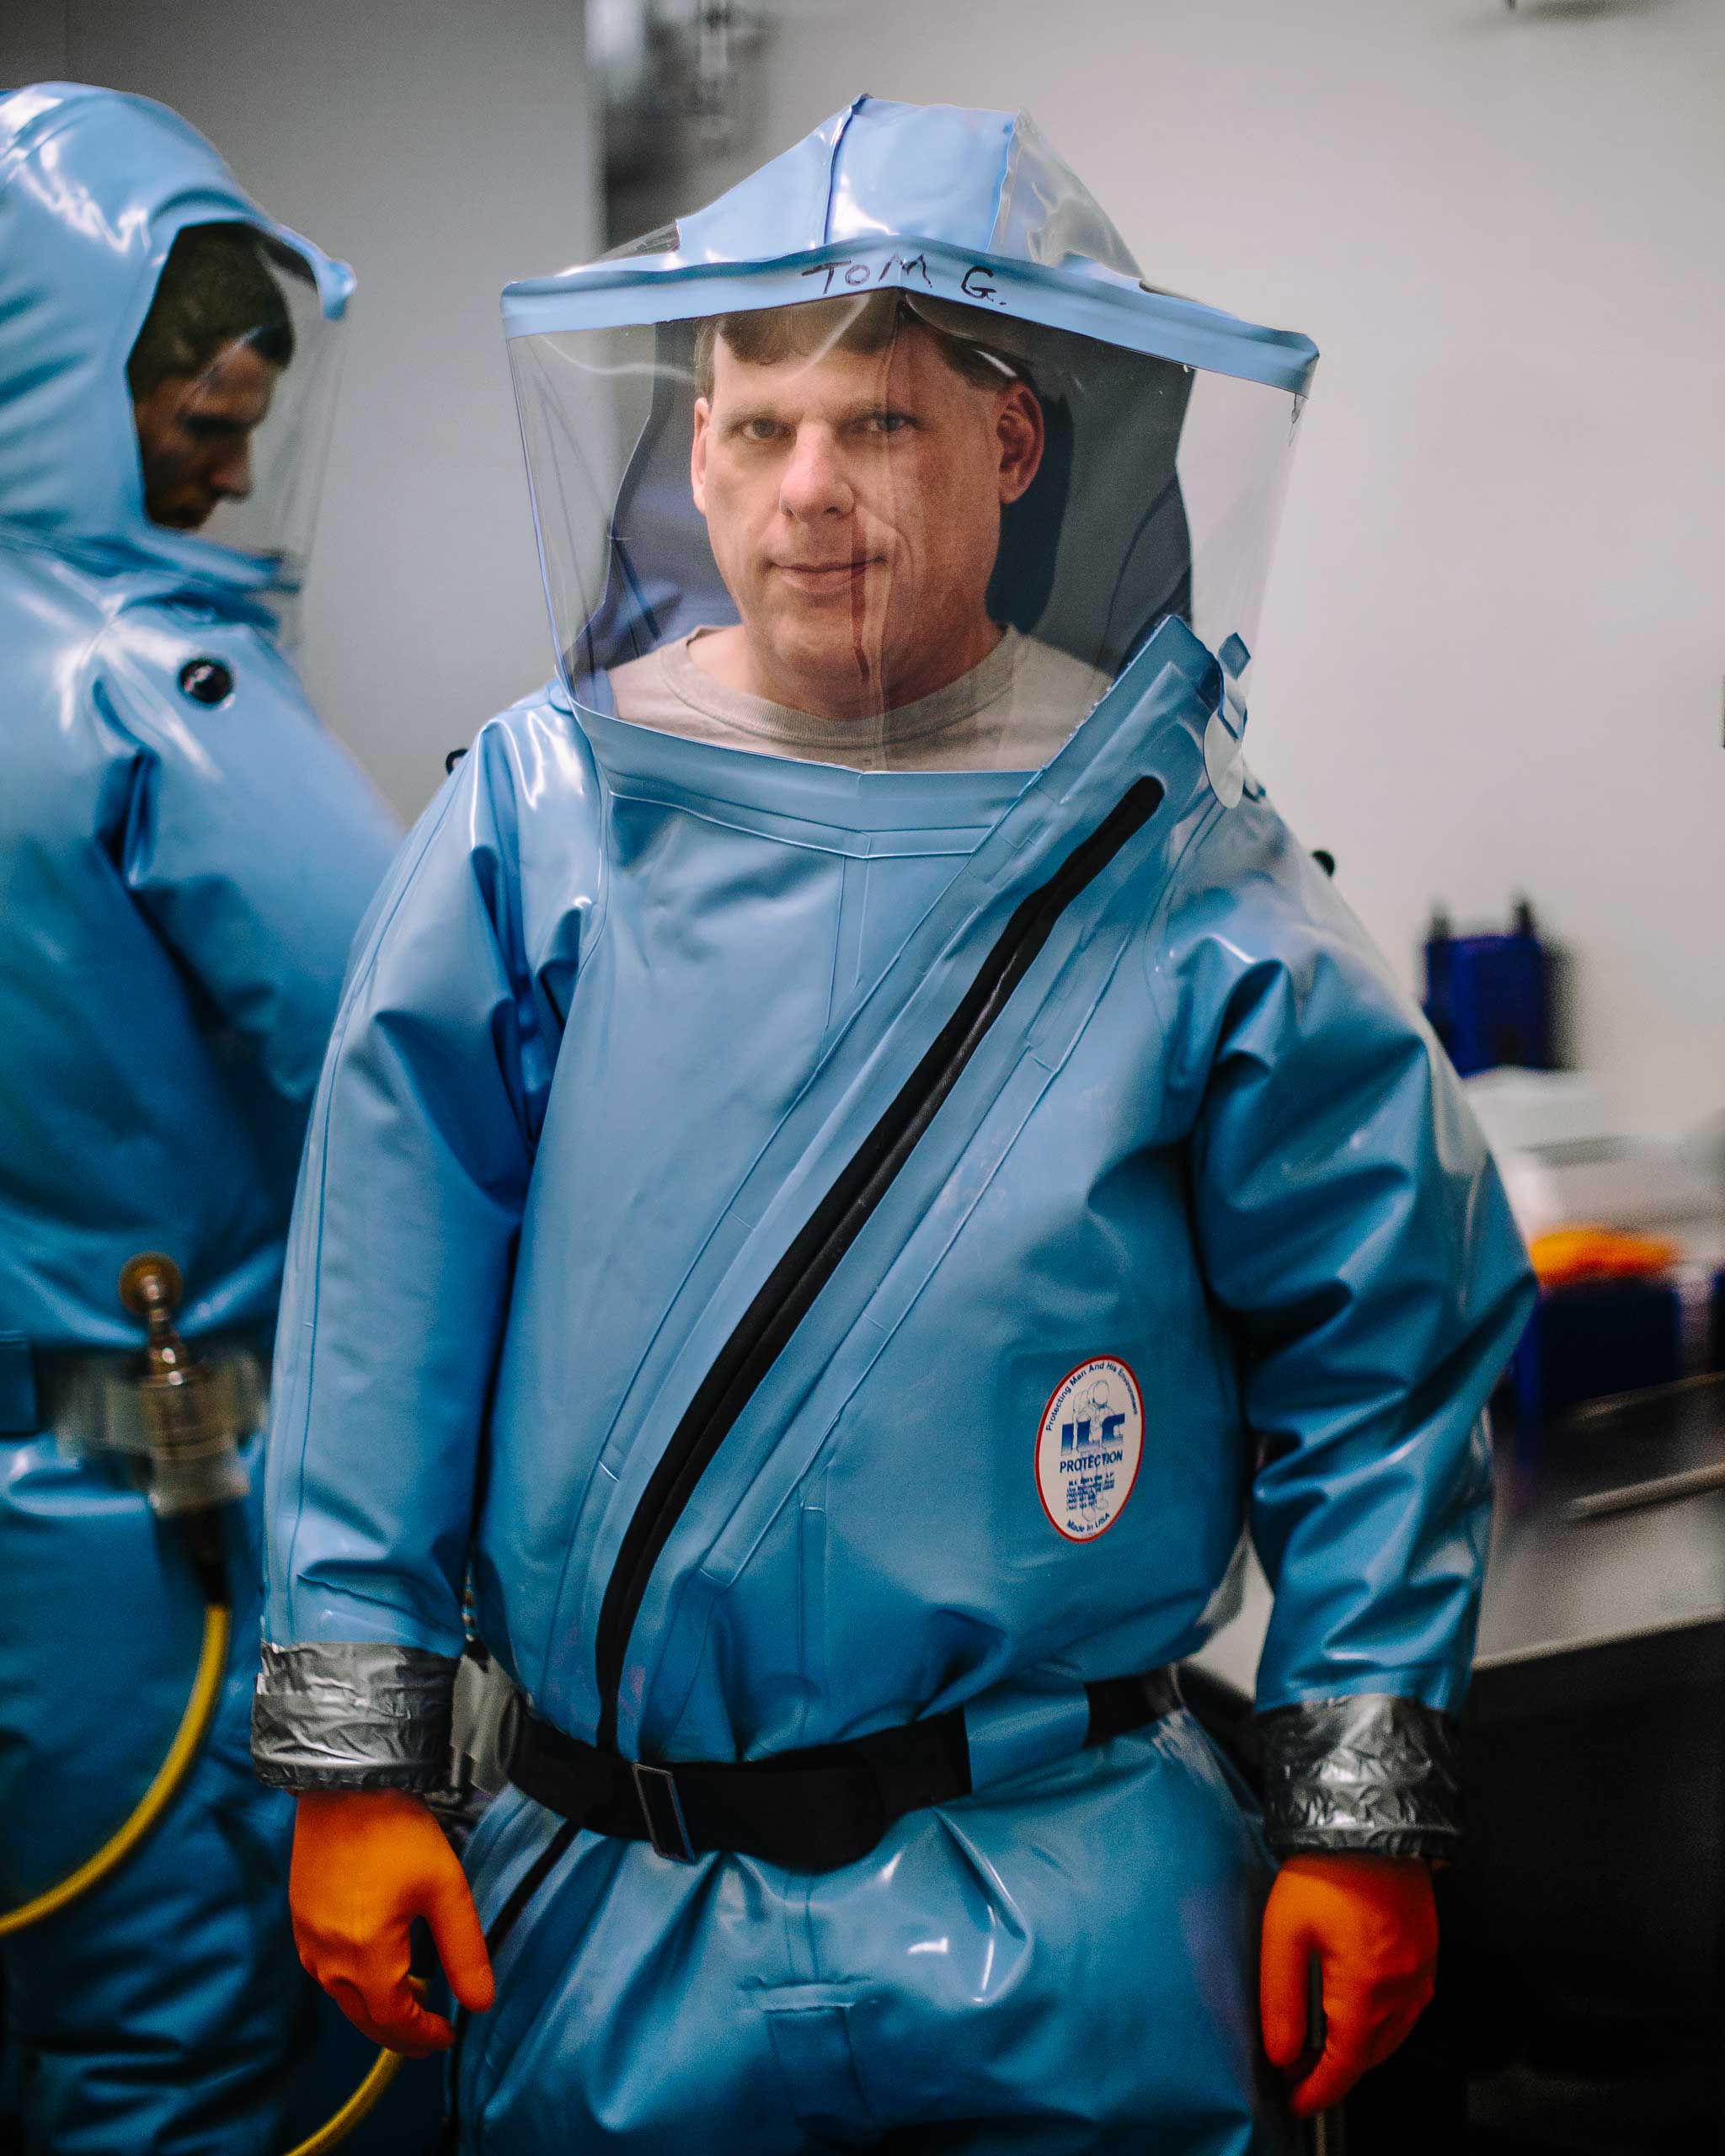 Professor Thomas W. Geisbert at his Lab at the the University of Texas Medical Branch in Galveston. Dec. 2, 2014. Geisbert is a virologist who conducted the first Trials of the Drug TKM-EBOLA.